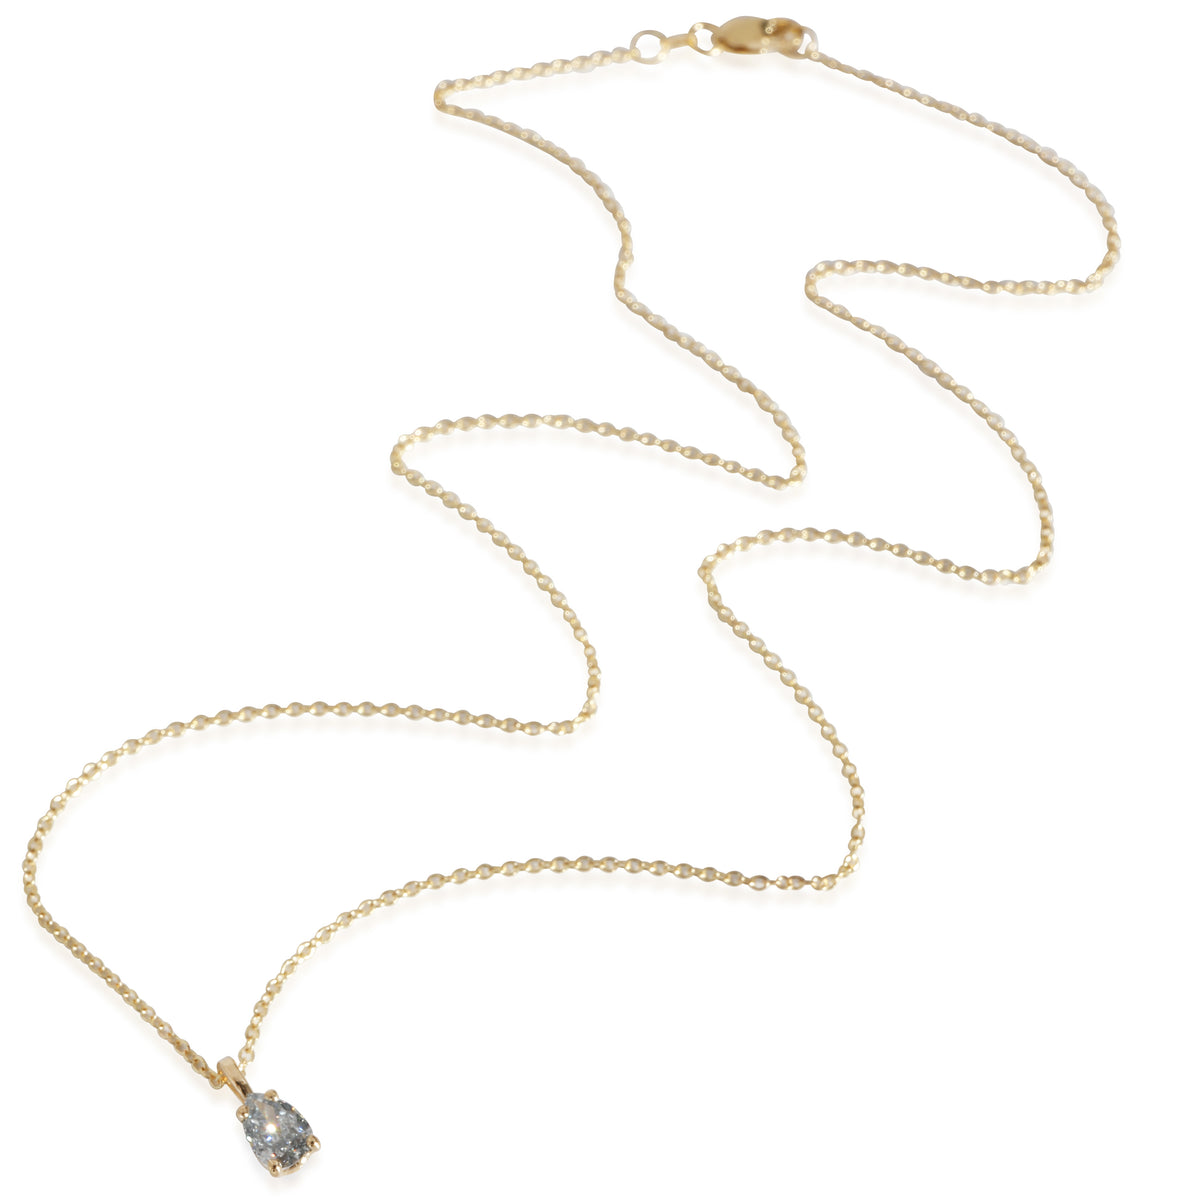 Fancy Greyish Blue Pear Shape Diamond Necklace in 14K Yellow Gold (0.50 CT SI2)